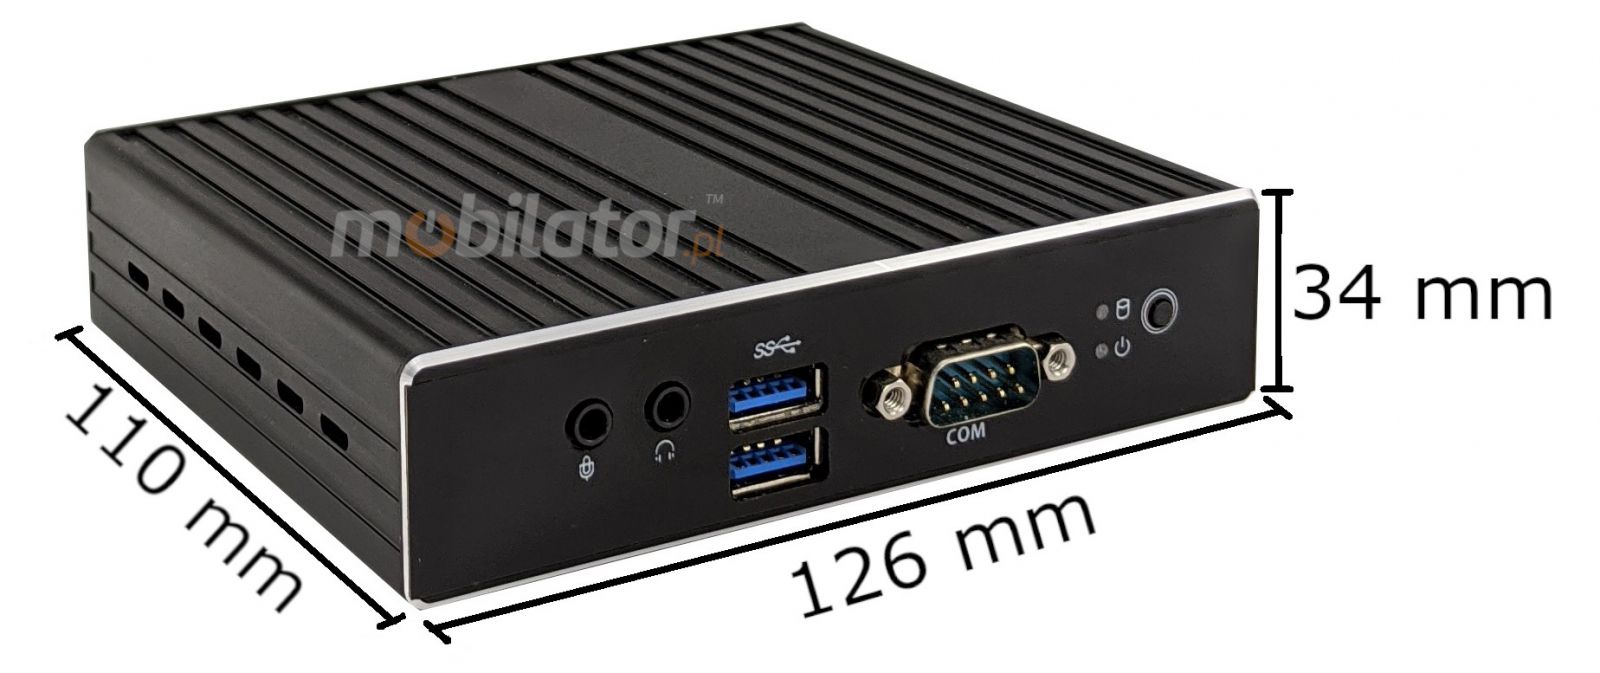 Polywell-Nano-N3350D  efficient, fast and reliable mini pc with small dimensions